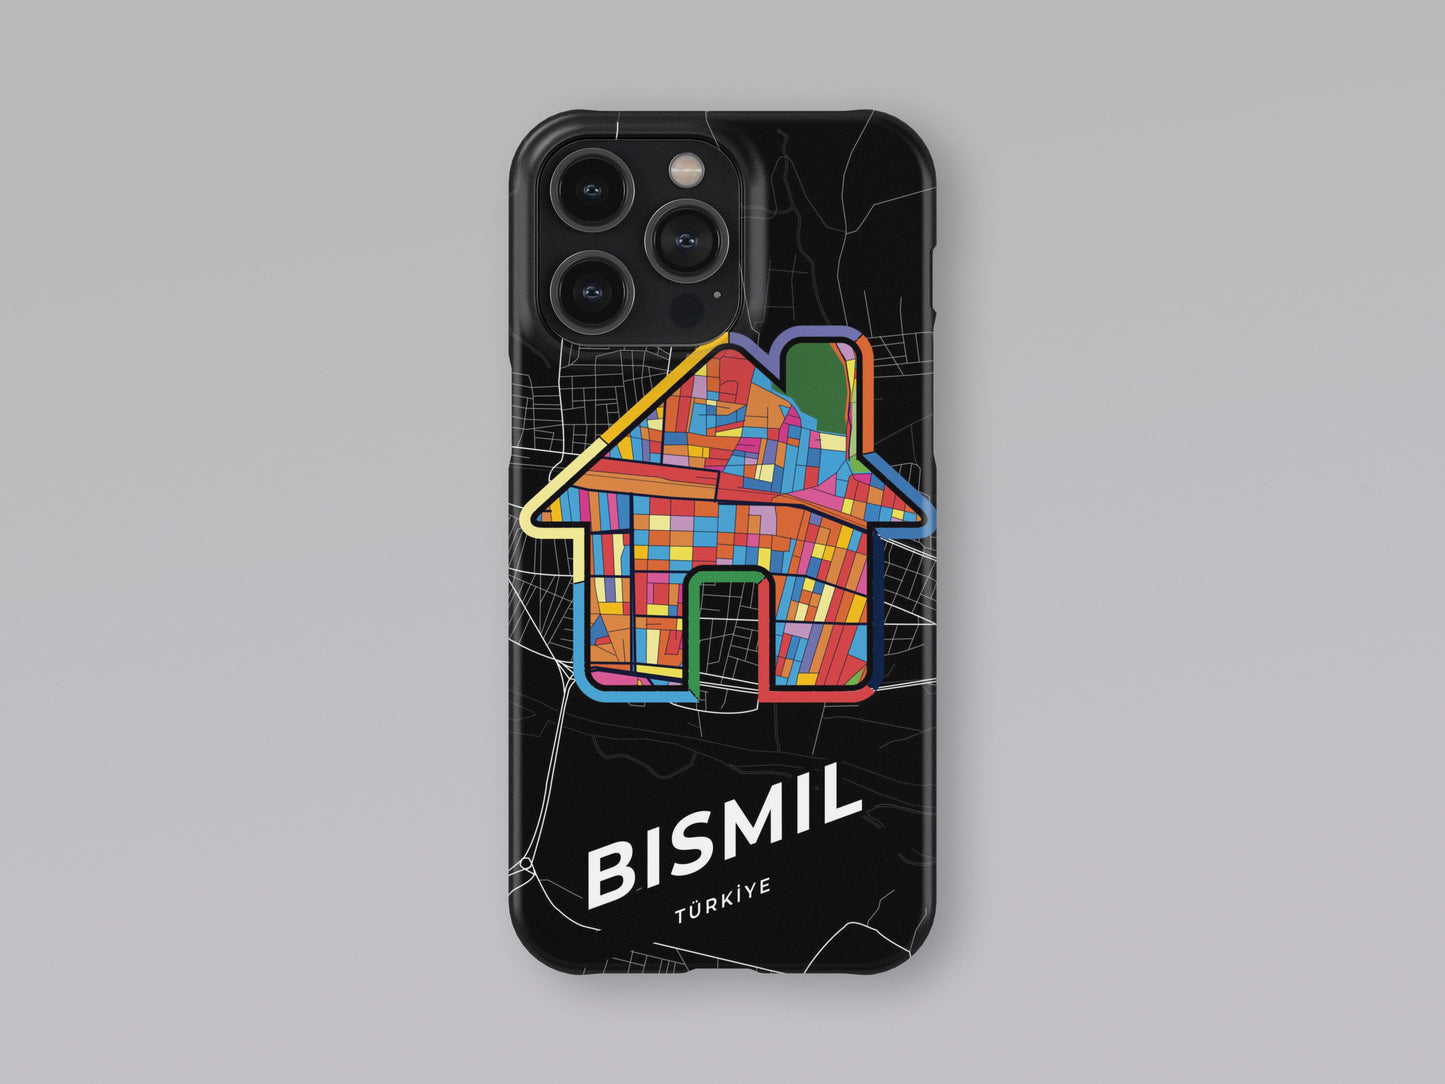 Bismil Turkey slim phone case with colorful icon. Birthday, wedding or housewarming gift. Couple match cases. 3